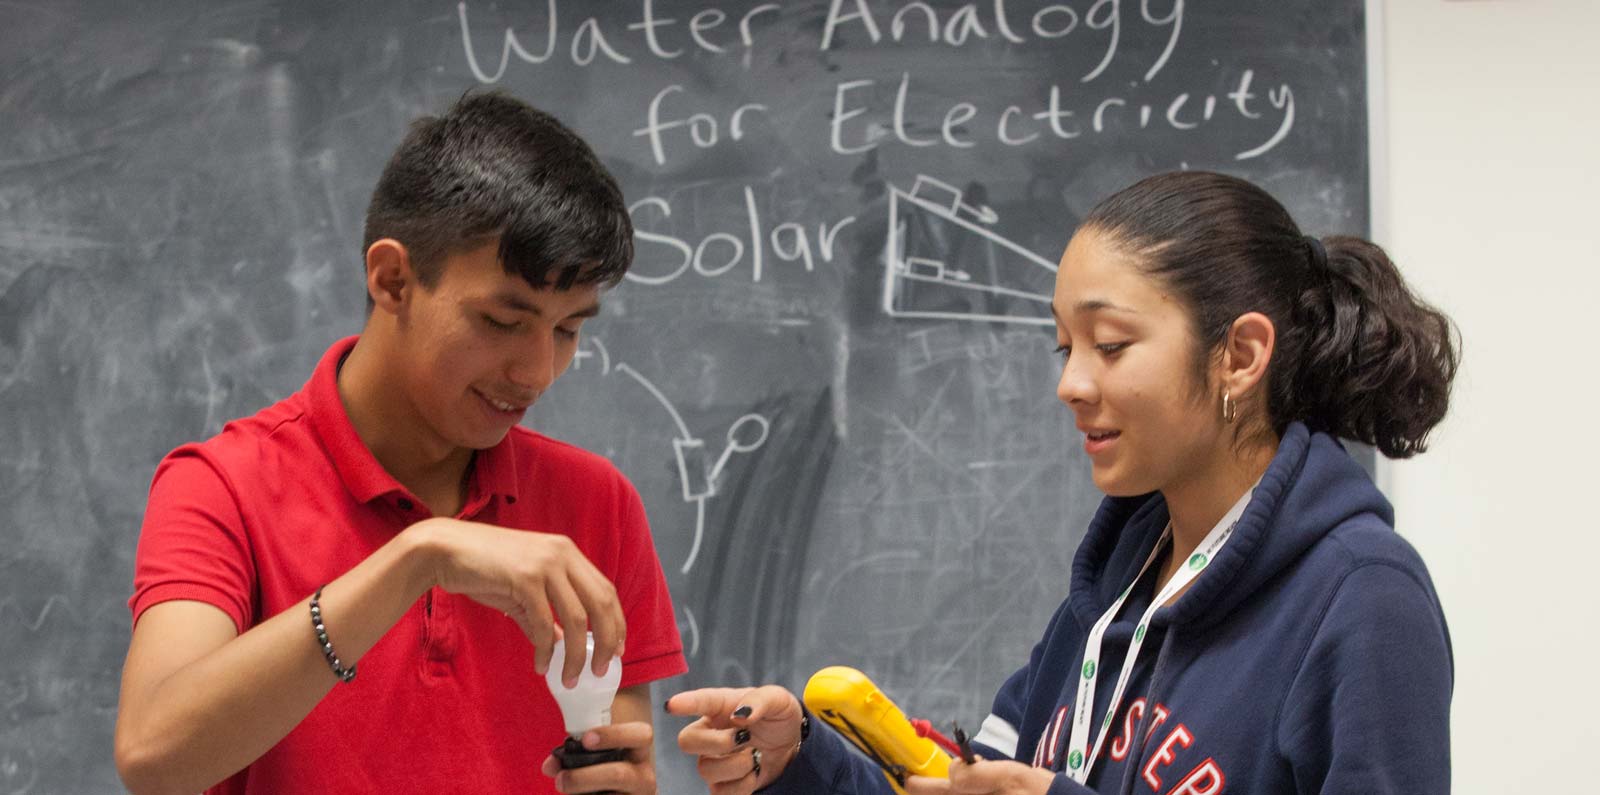 Teenaged students work on an experiment including a light bulb circuit and an volt meter with the words " Water Analogy for Electricity" on a chalkboard behind them.